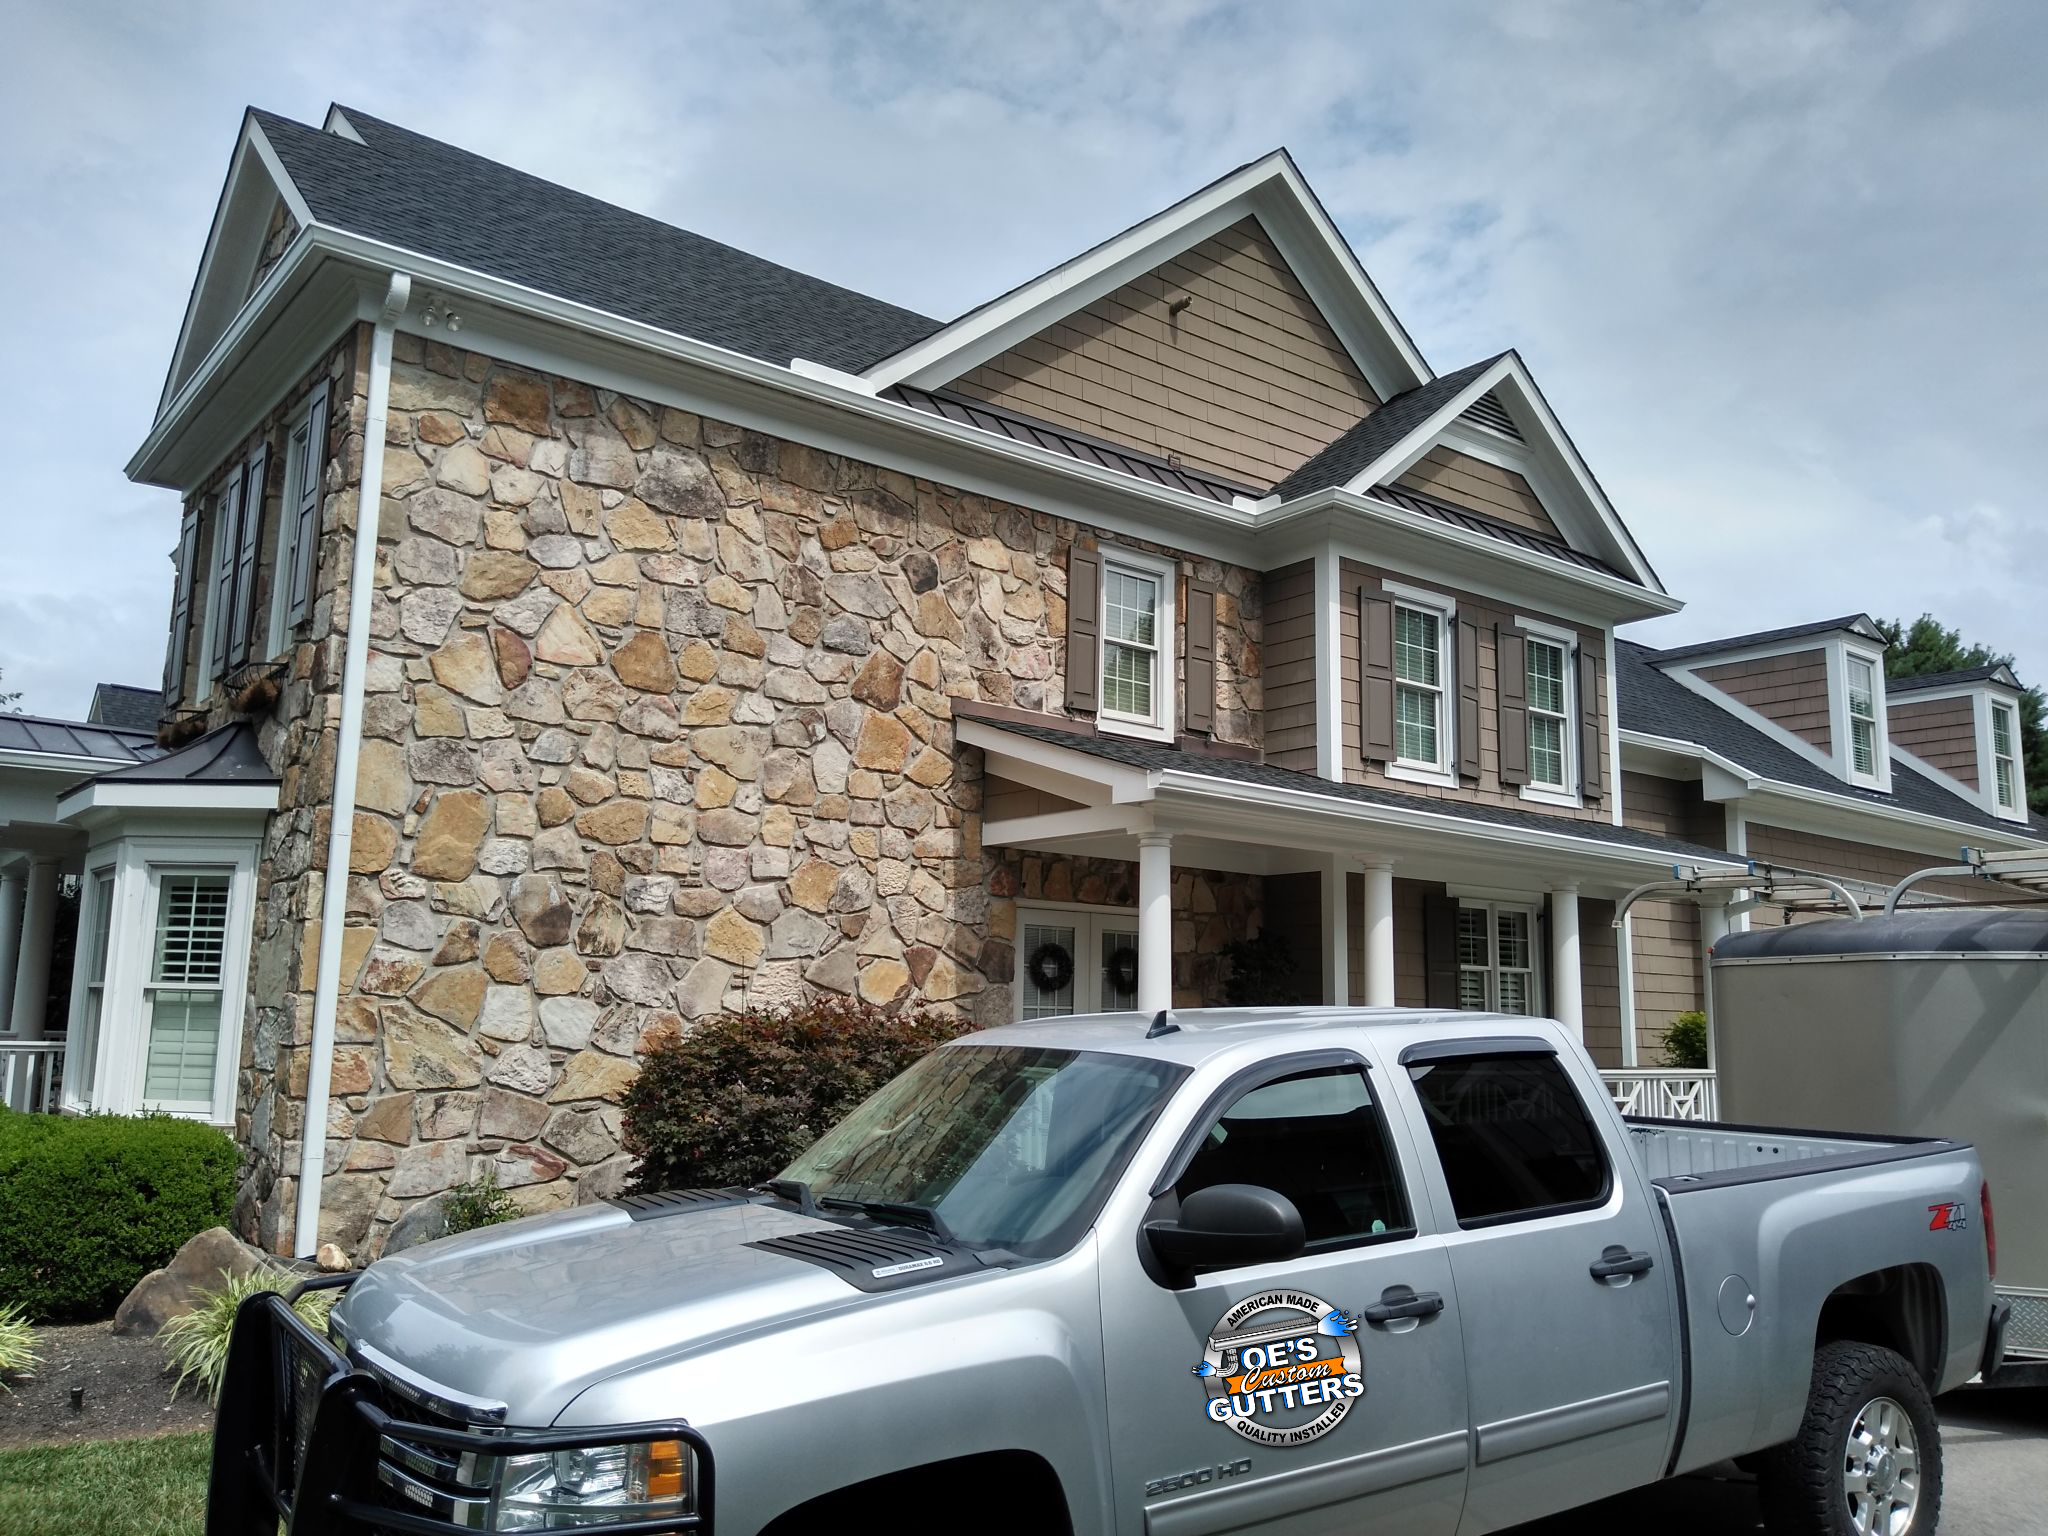 Gutter cleaning in Knoxville TN